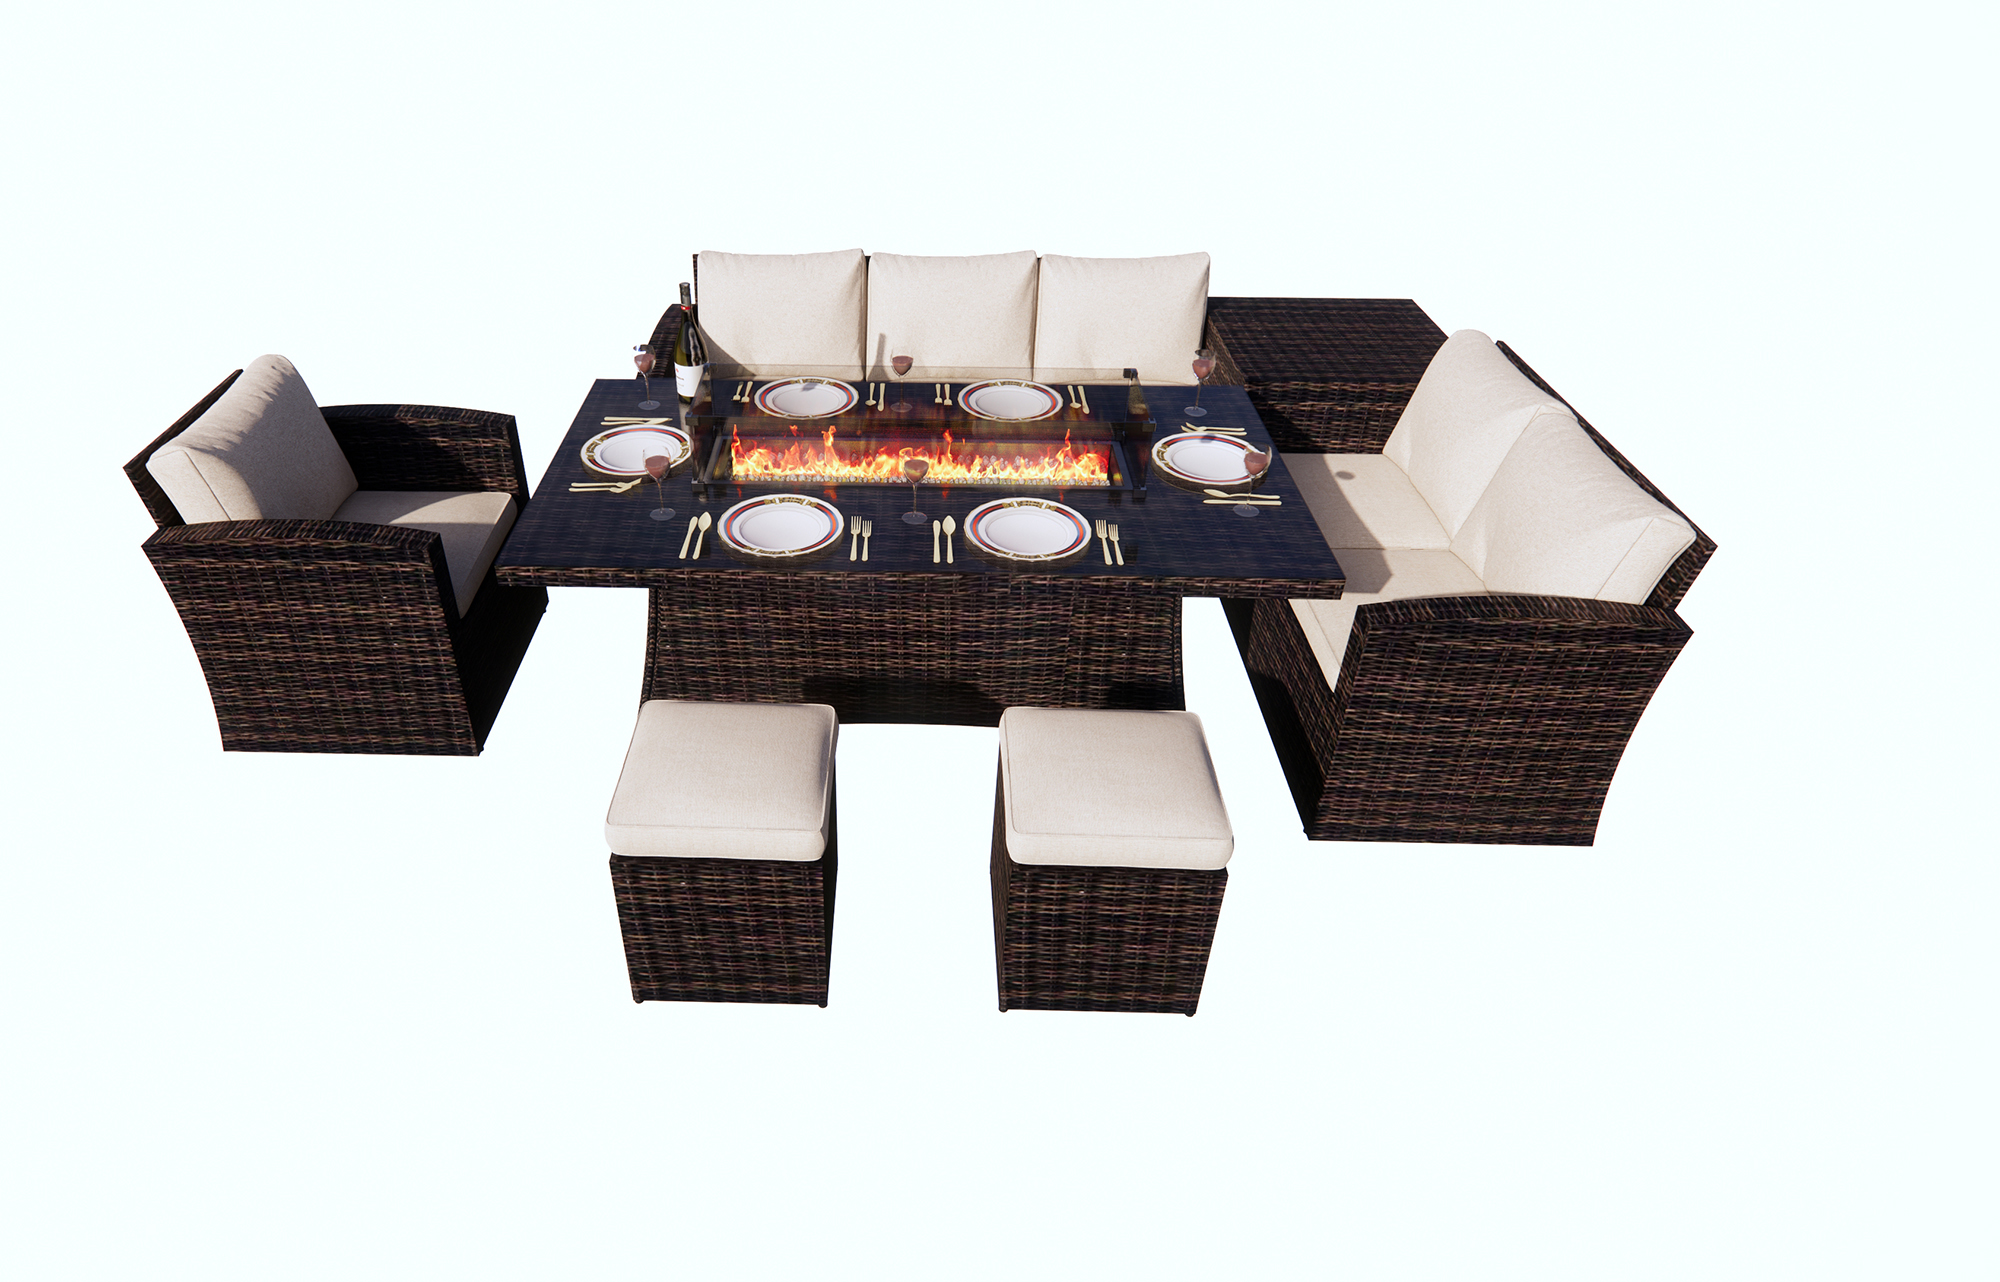 Moda Furnishings Pag 2403b Br Fire Pit, Kmart Fire Pit Clearance